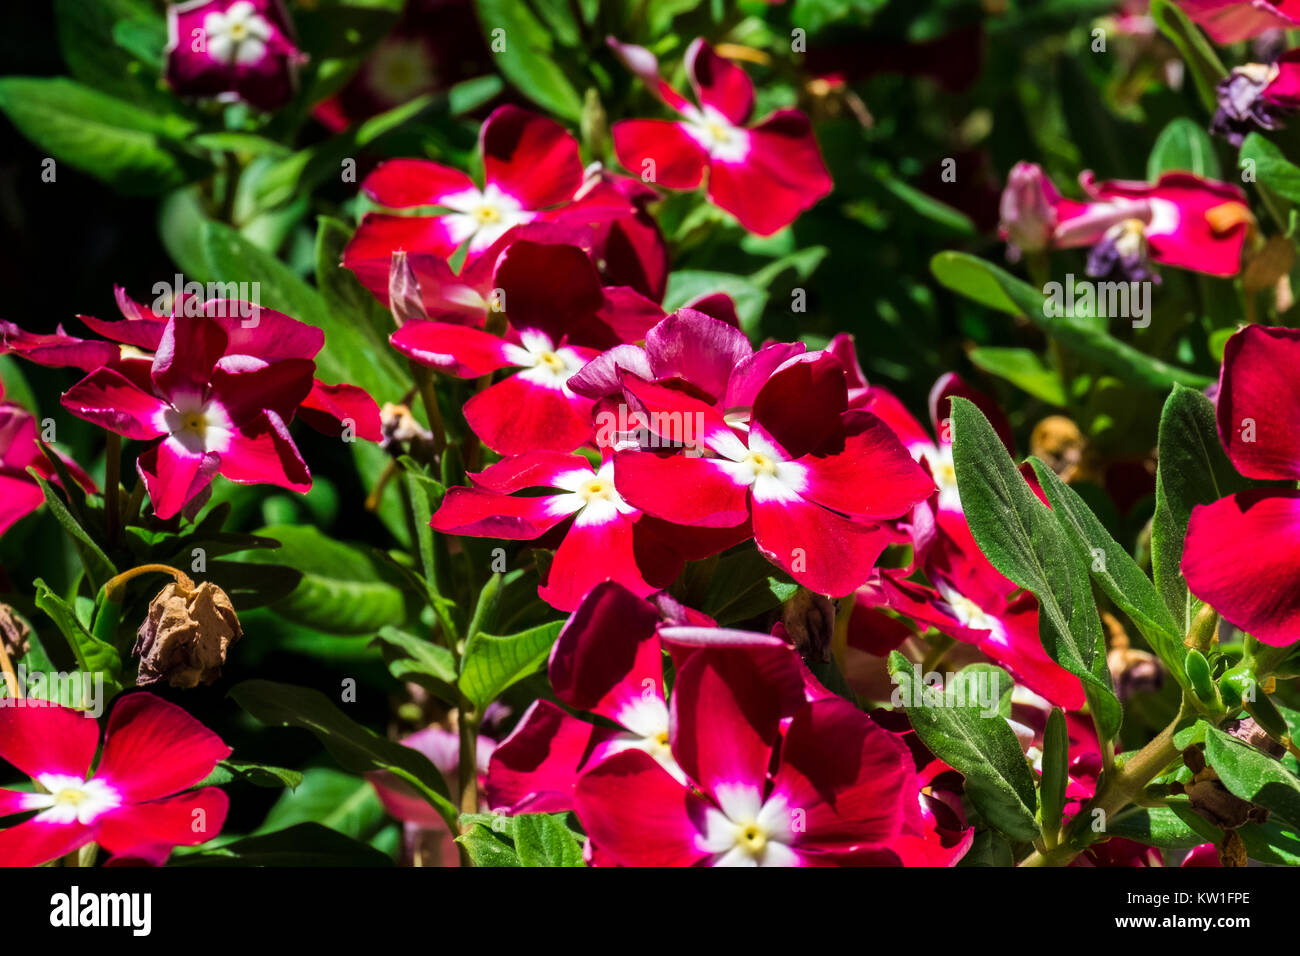 Scarlet vinca flowers with white centers (Catharanthus roseus) Stock Photo